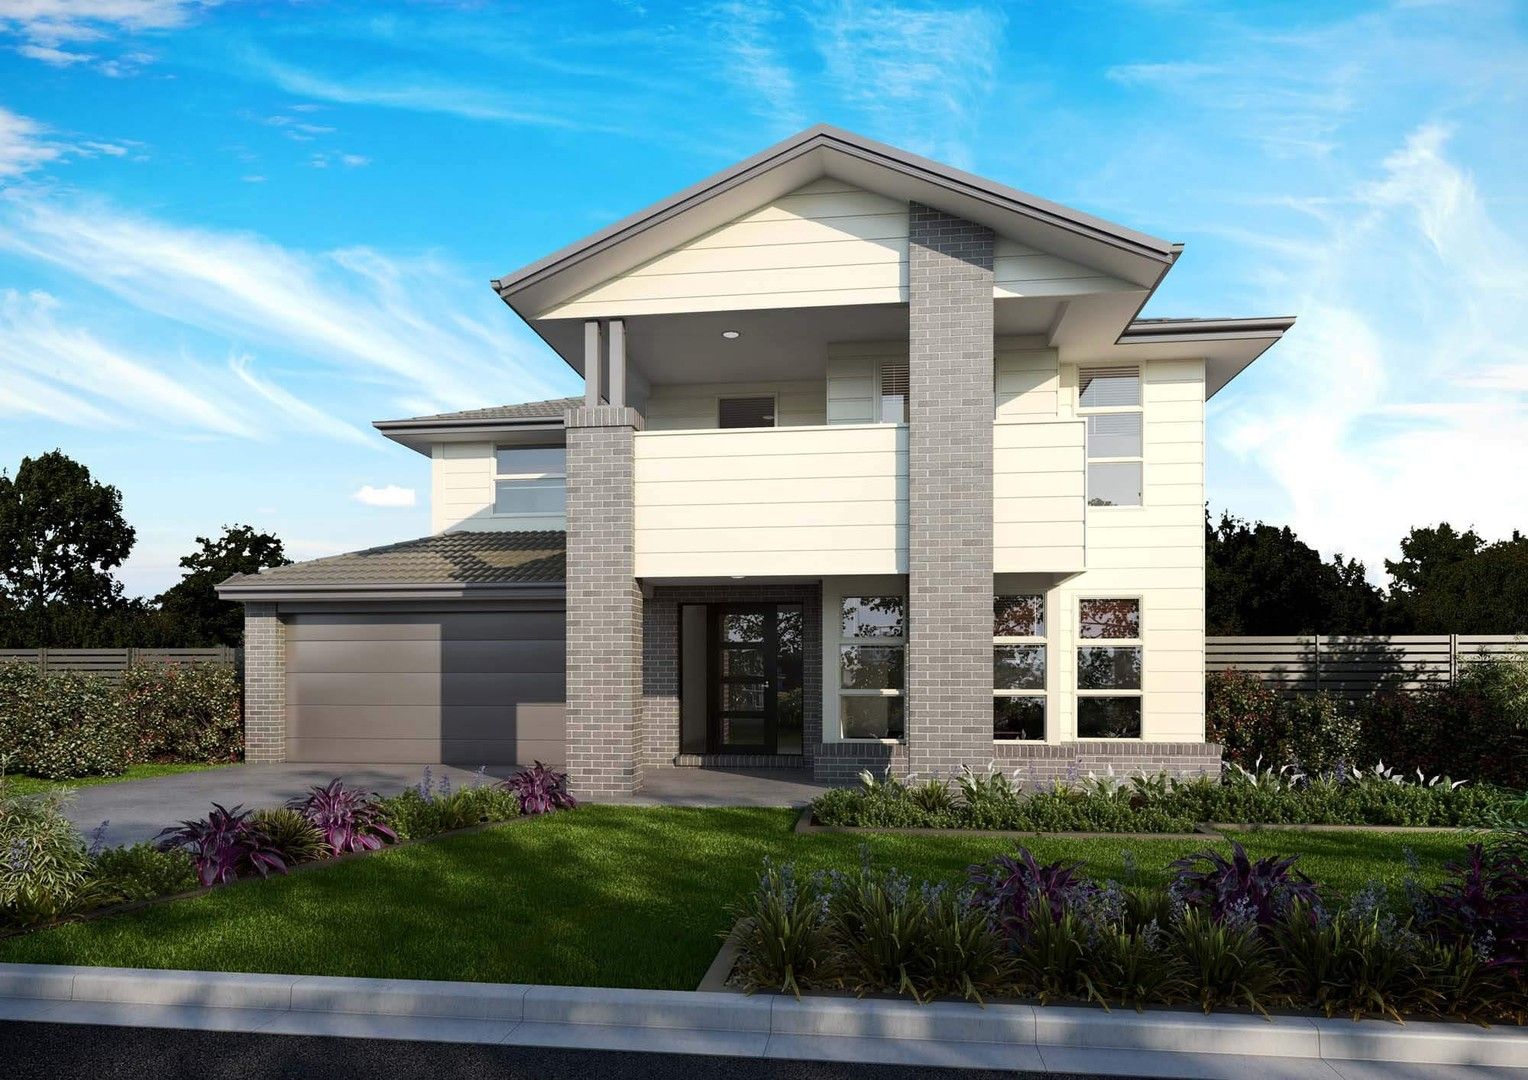 4 bedrooms New House & Land in 548 Banksia Estate ARMSTRONG CREEK VIC, 3217